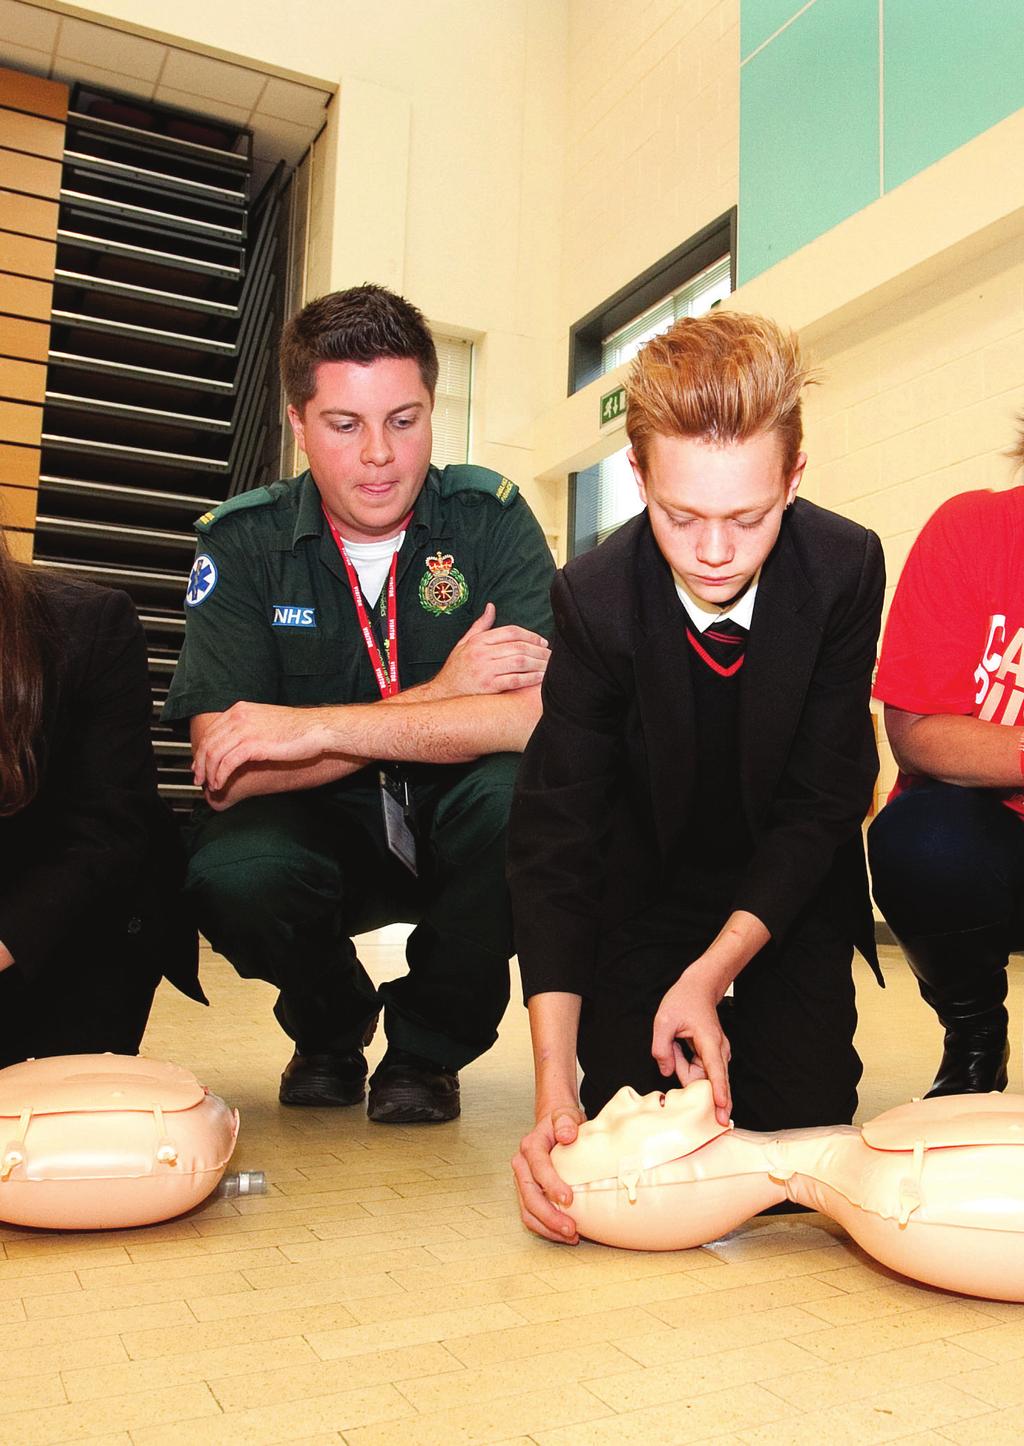 Foreword Cardiopulmonary resuscitation (CPR) is attempted in nearly 30,000 people who suffer out-of-hospital cardiac arrest (OHCA) in England each year, but survival rates are low and compare